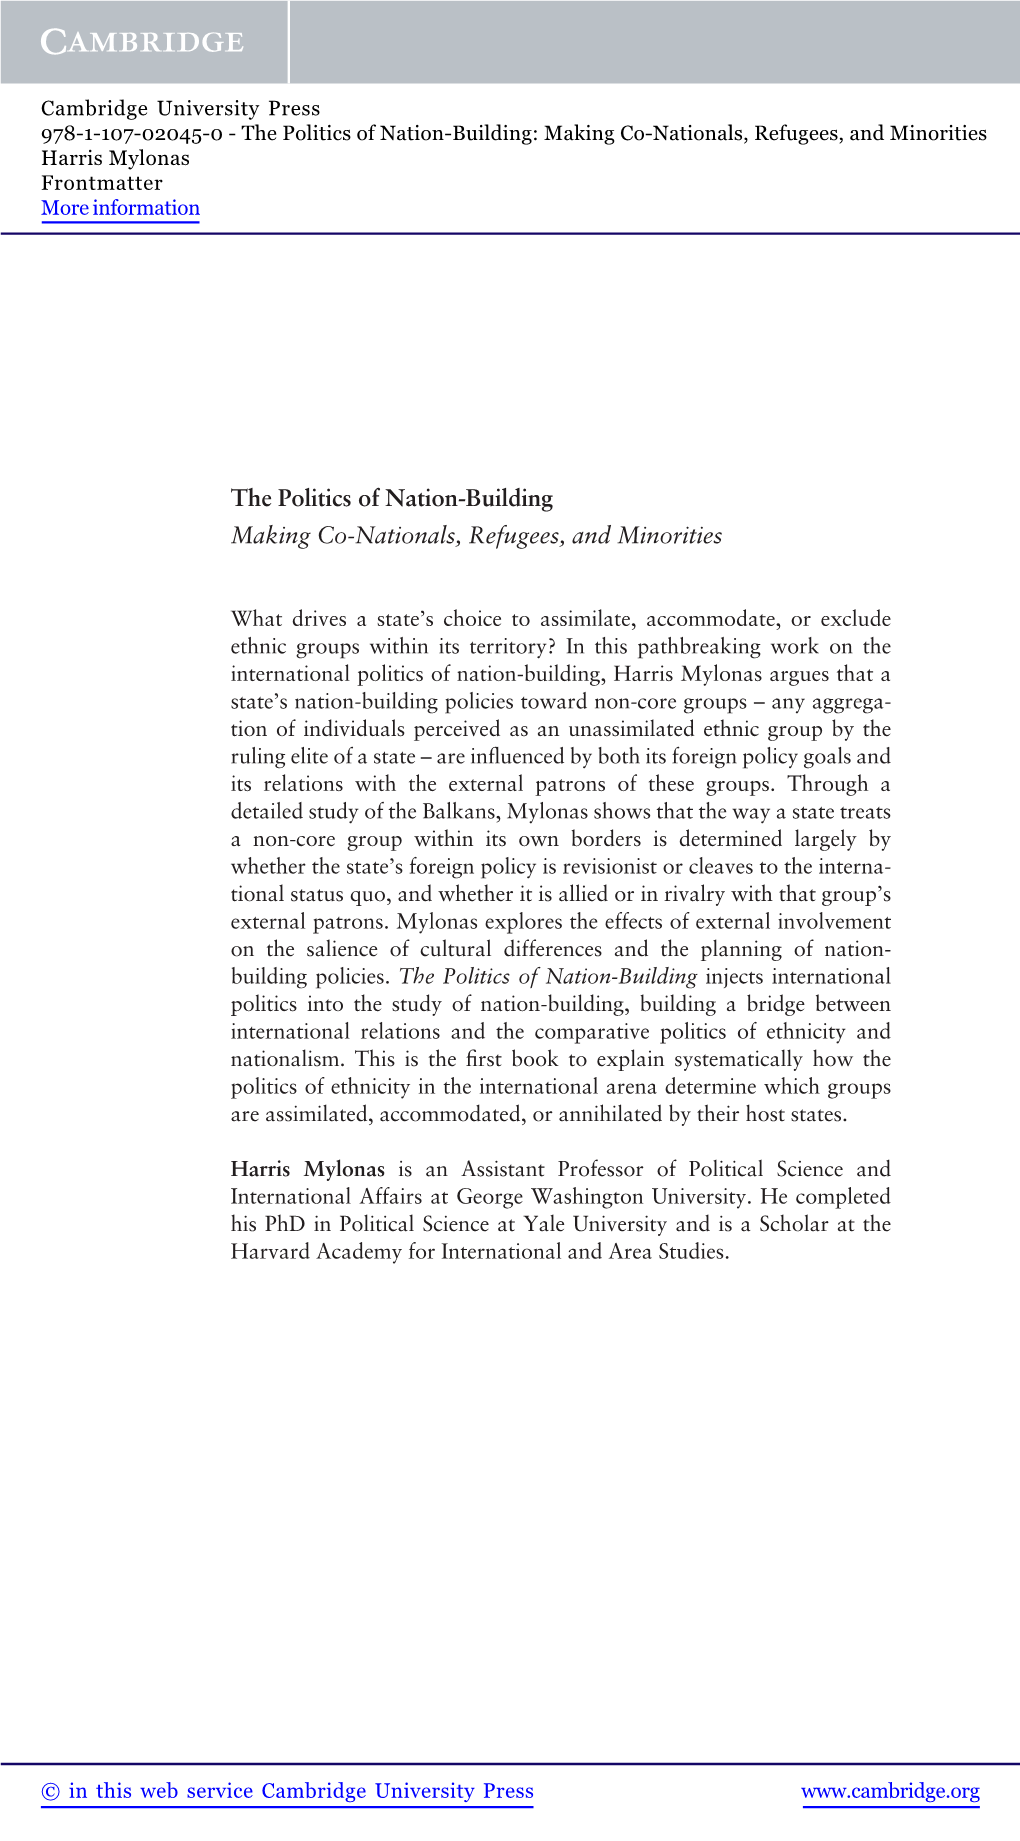 The Politics of Nation-Building: Making Co-Nationals, Refugees, and Minorities Harris Mylonas Frontmatter More Information